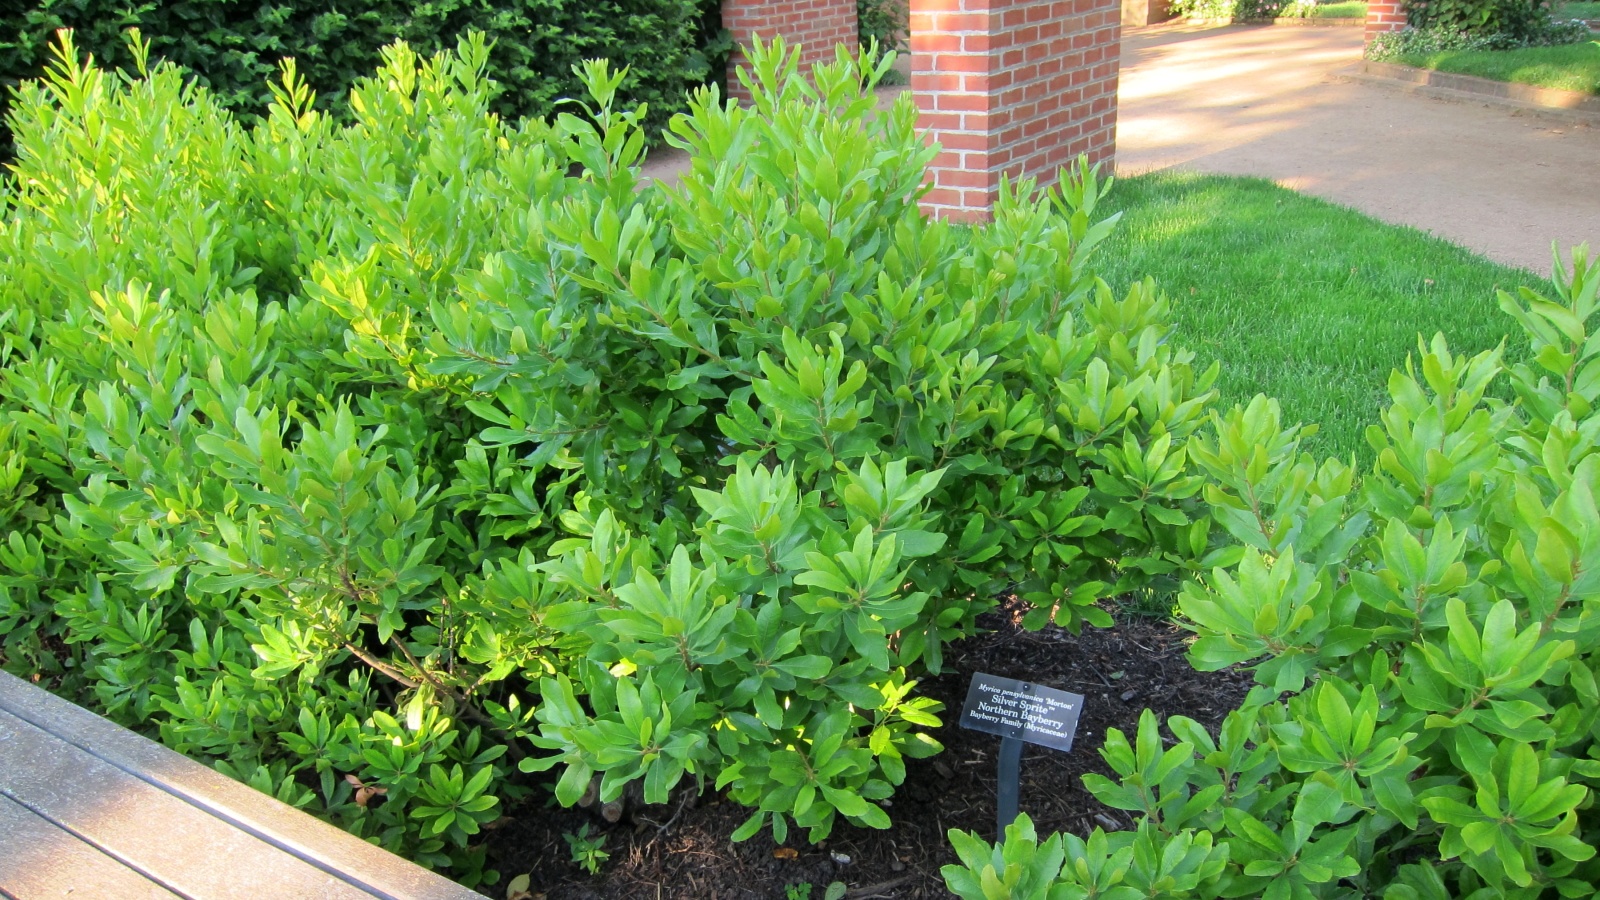 Lush green shrubs in a garden with a label.